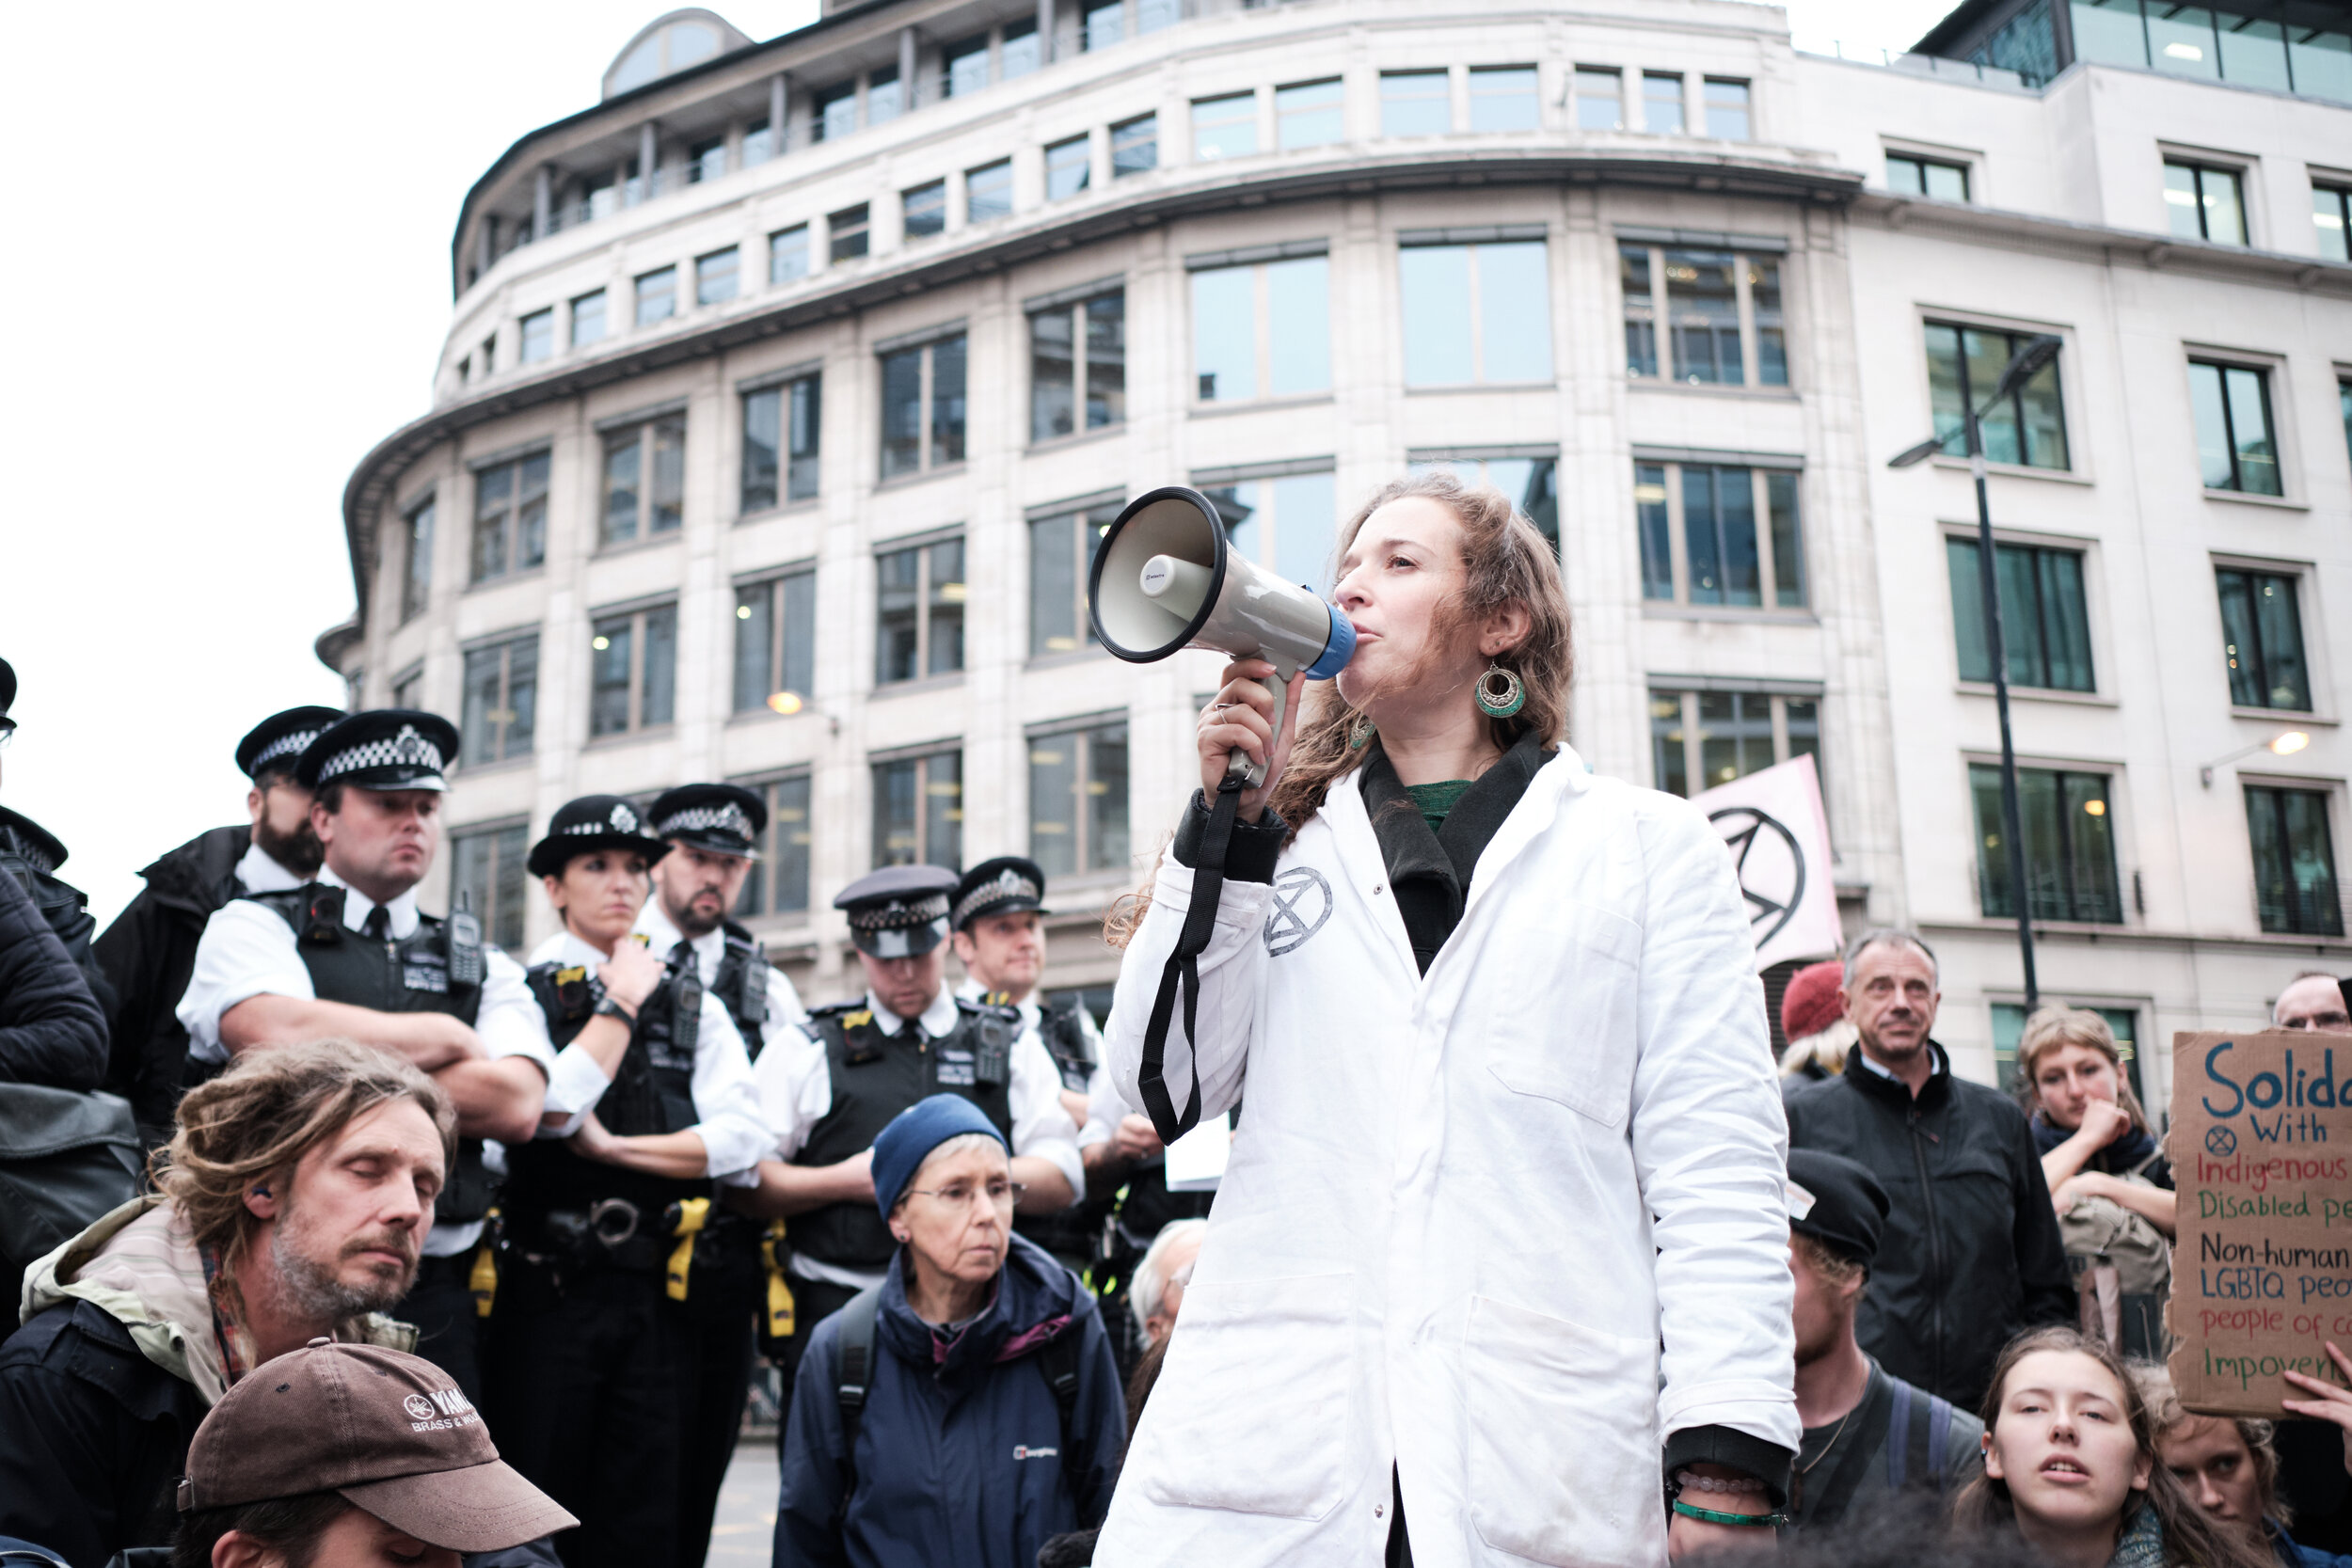  Analogous to Doctors for Extinction Rebellion, Scientists for Extinction Rebellion is a scientists collective who believe it is time to take non-violent direct action to confront catastrophic climate and ecological breakdown. At the time of publishi